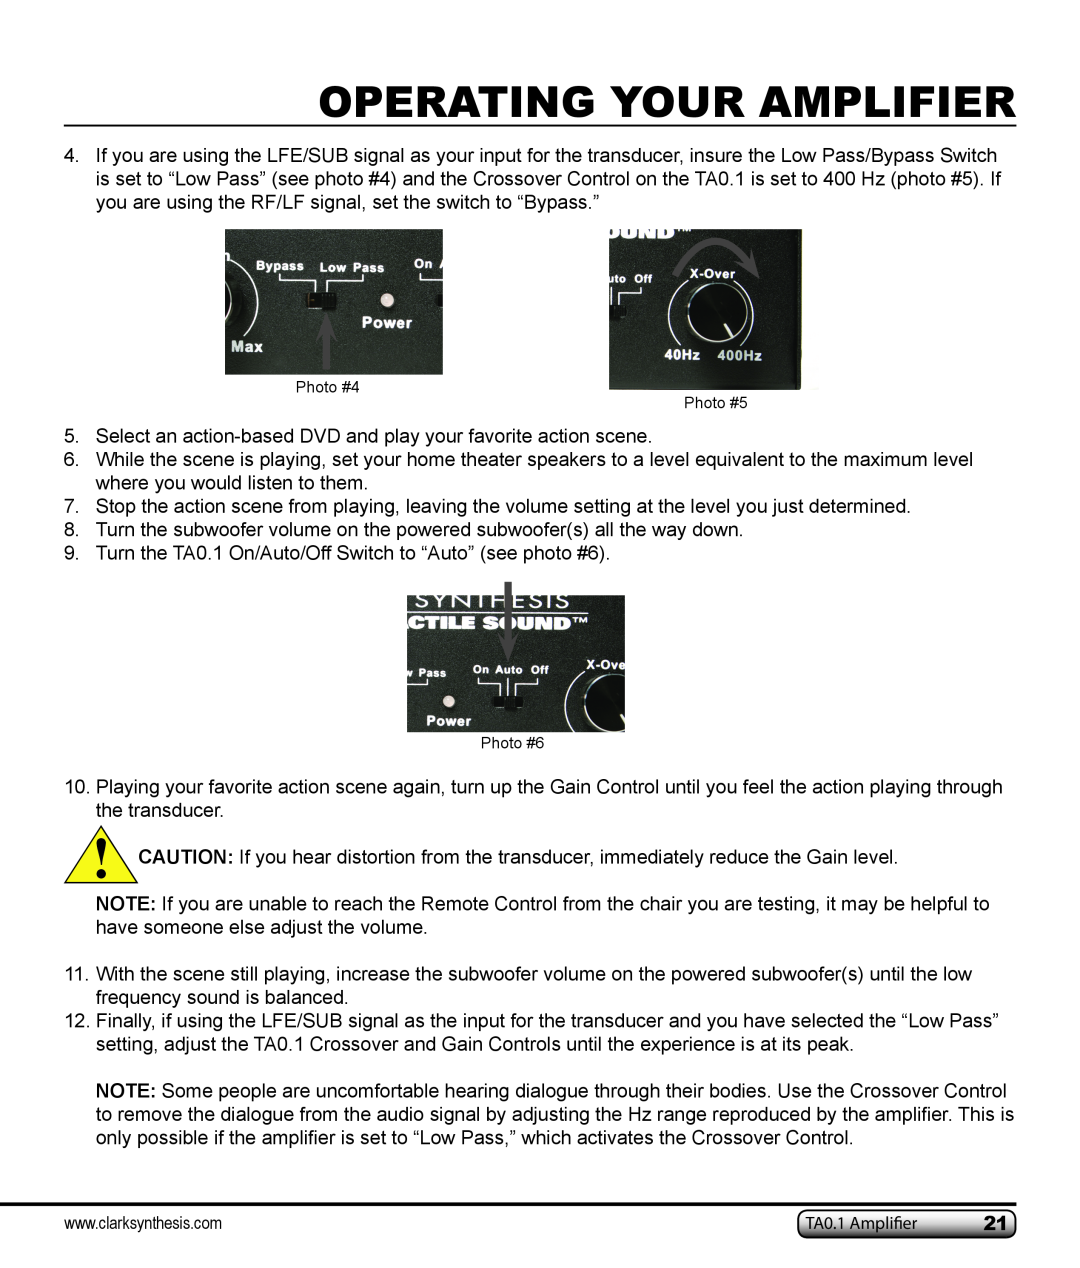 Clark Synthesis TA0.1 owner manual Operating Your Amplifier, Photo #4 Photo #5, Photo #6 